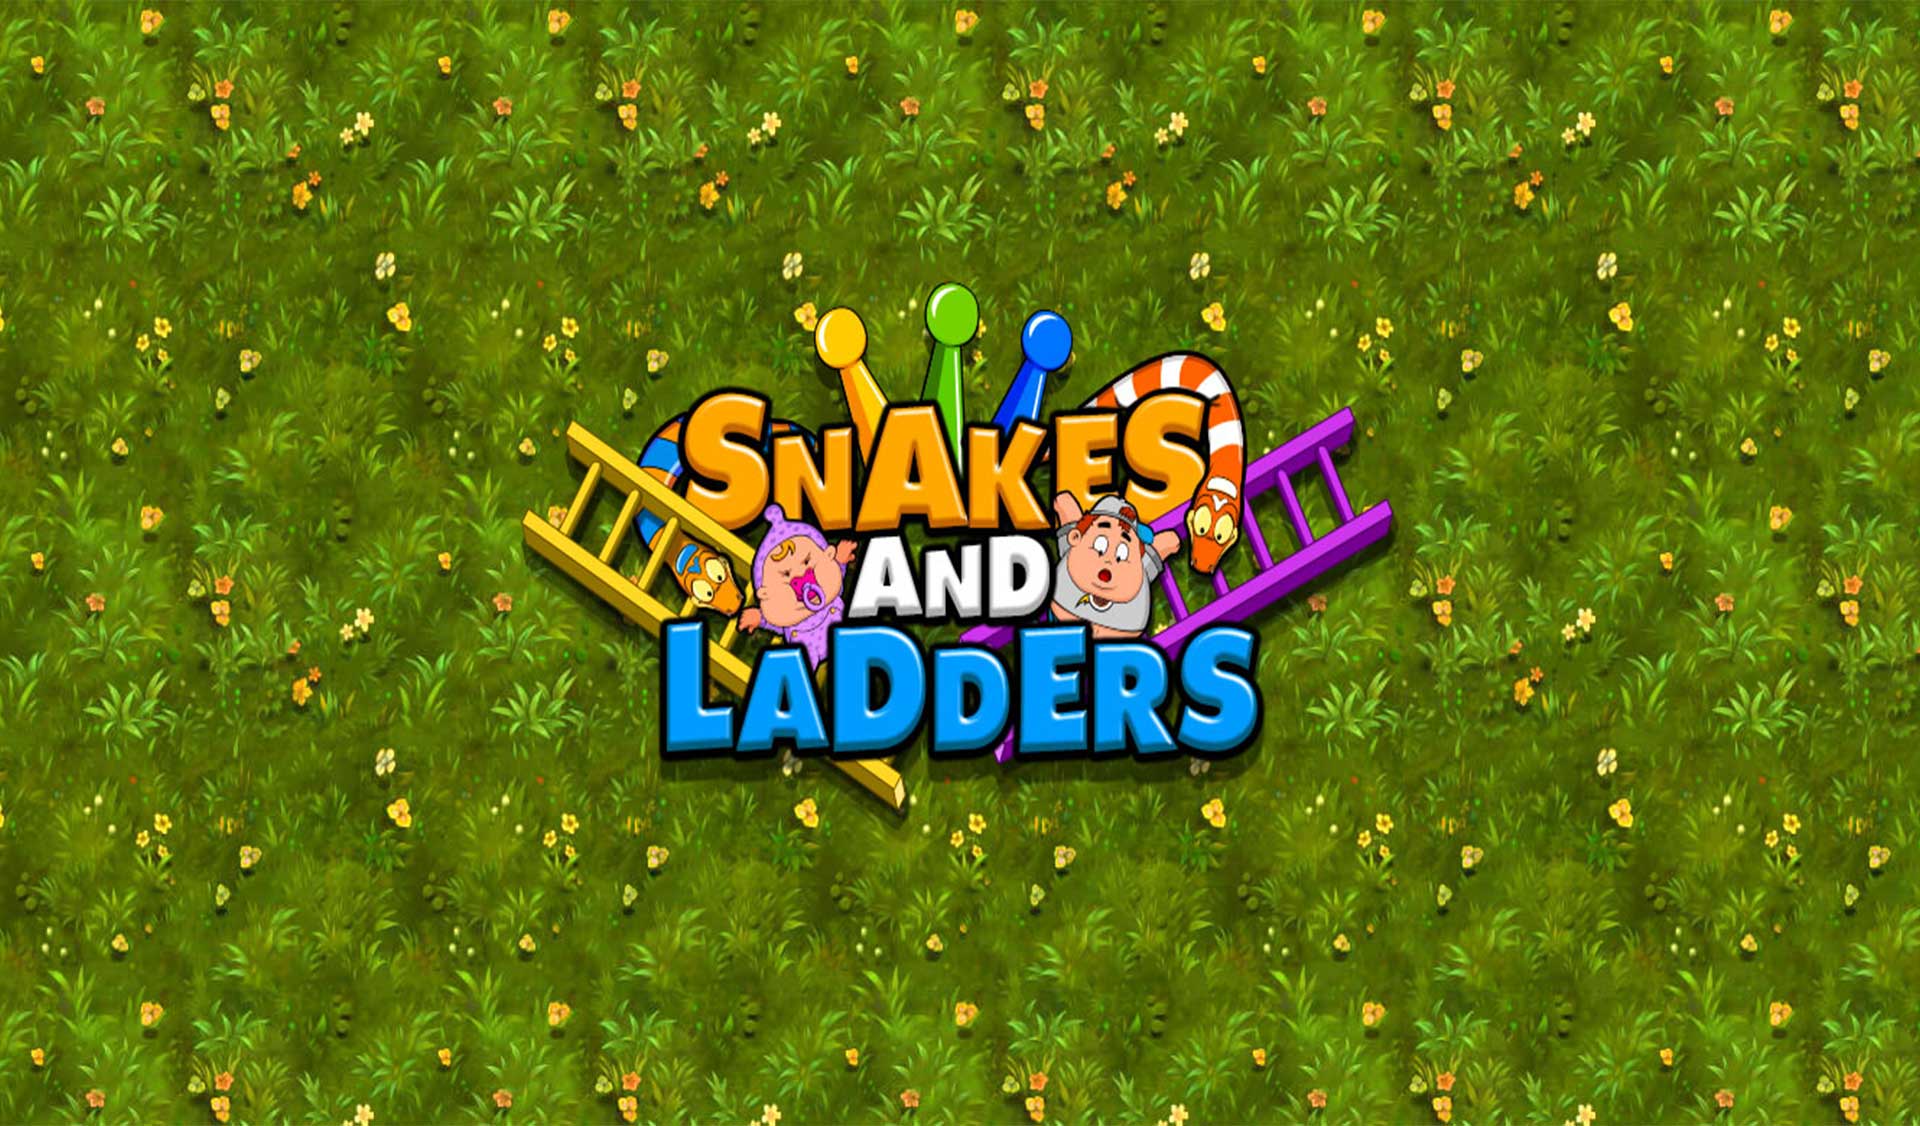 Snakes & Ladders - www.wootgames.com